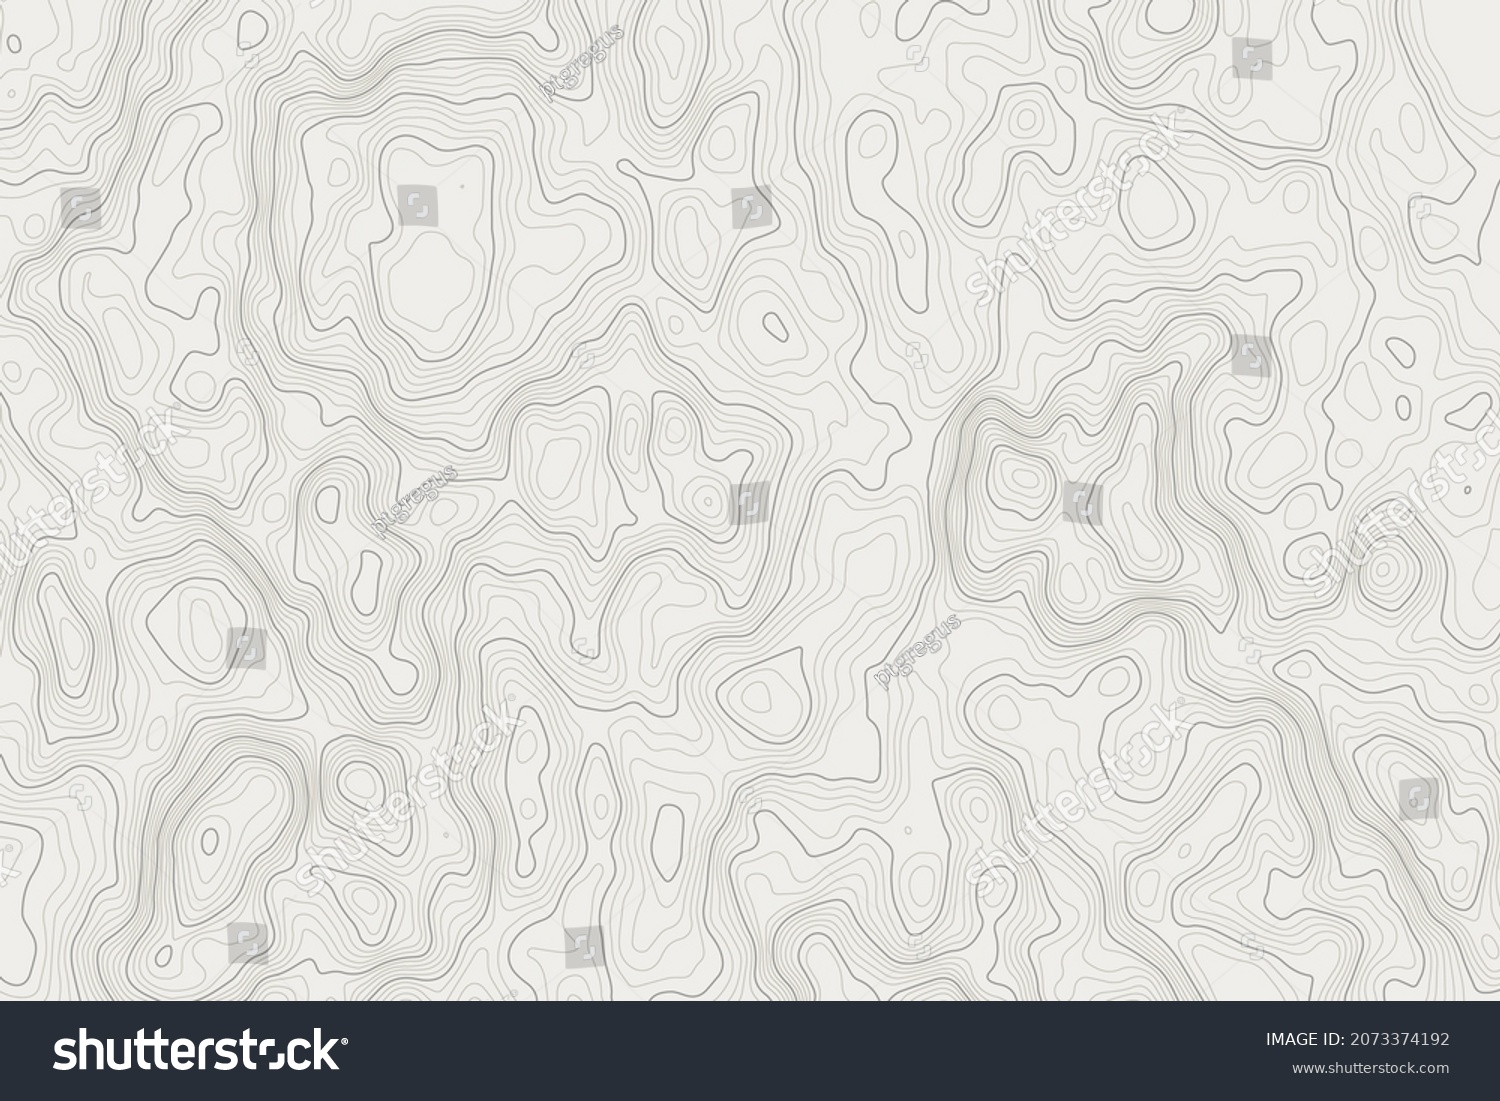 SVG of Stylized topographic contour map. Geographic line mountain relief. Abstract lines or wavy backdrop background. Cartography, topology, or terrain path concept. Vector illustration with editable stroke svg